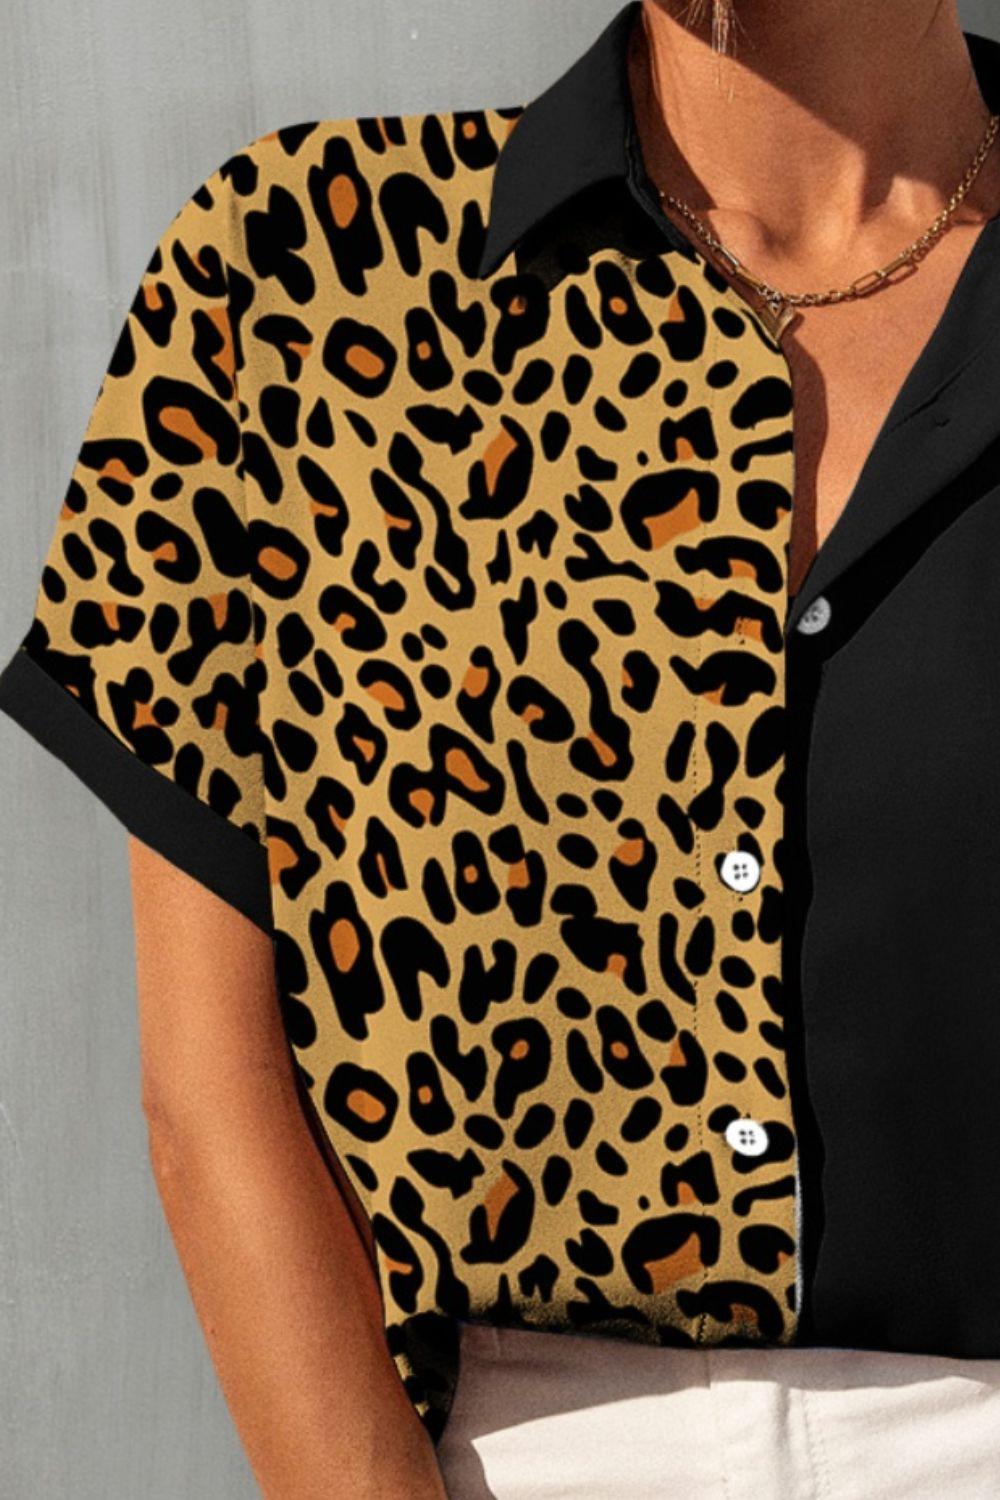 a woman wearing a leopard print shirt and white pants